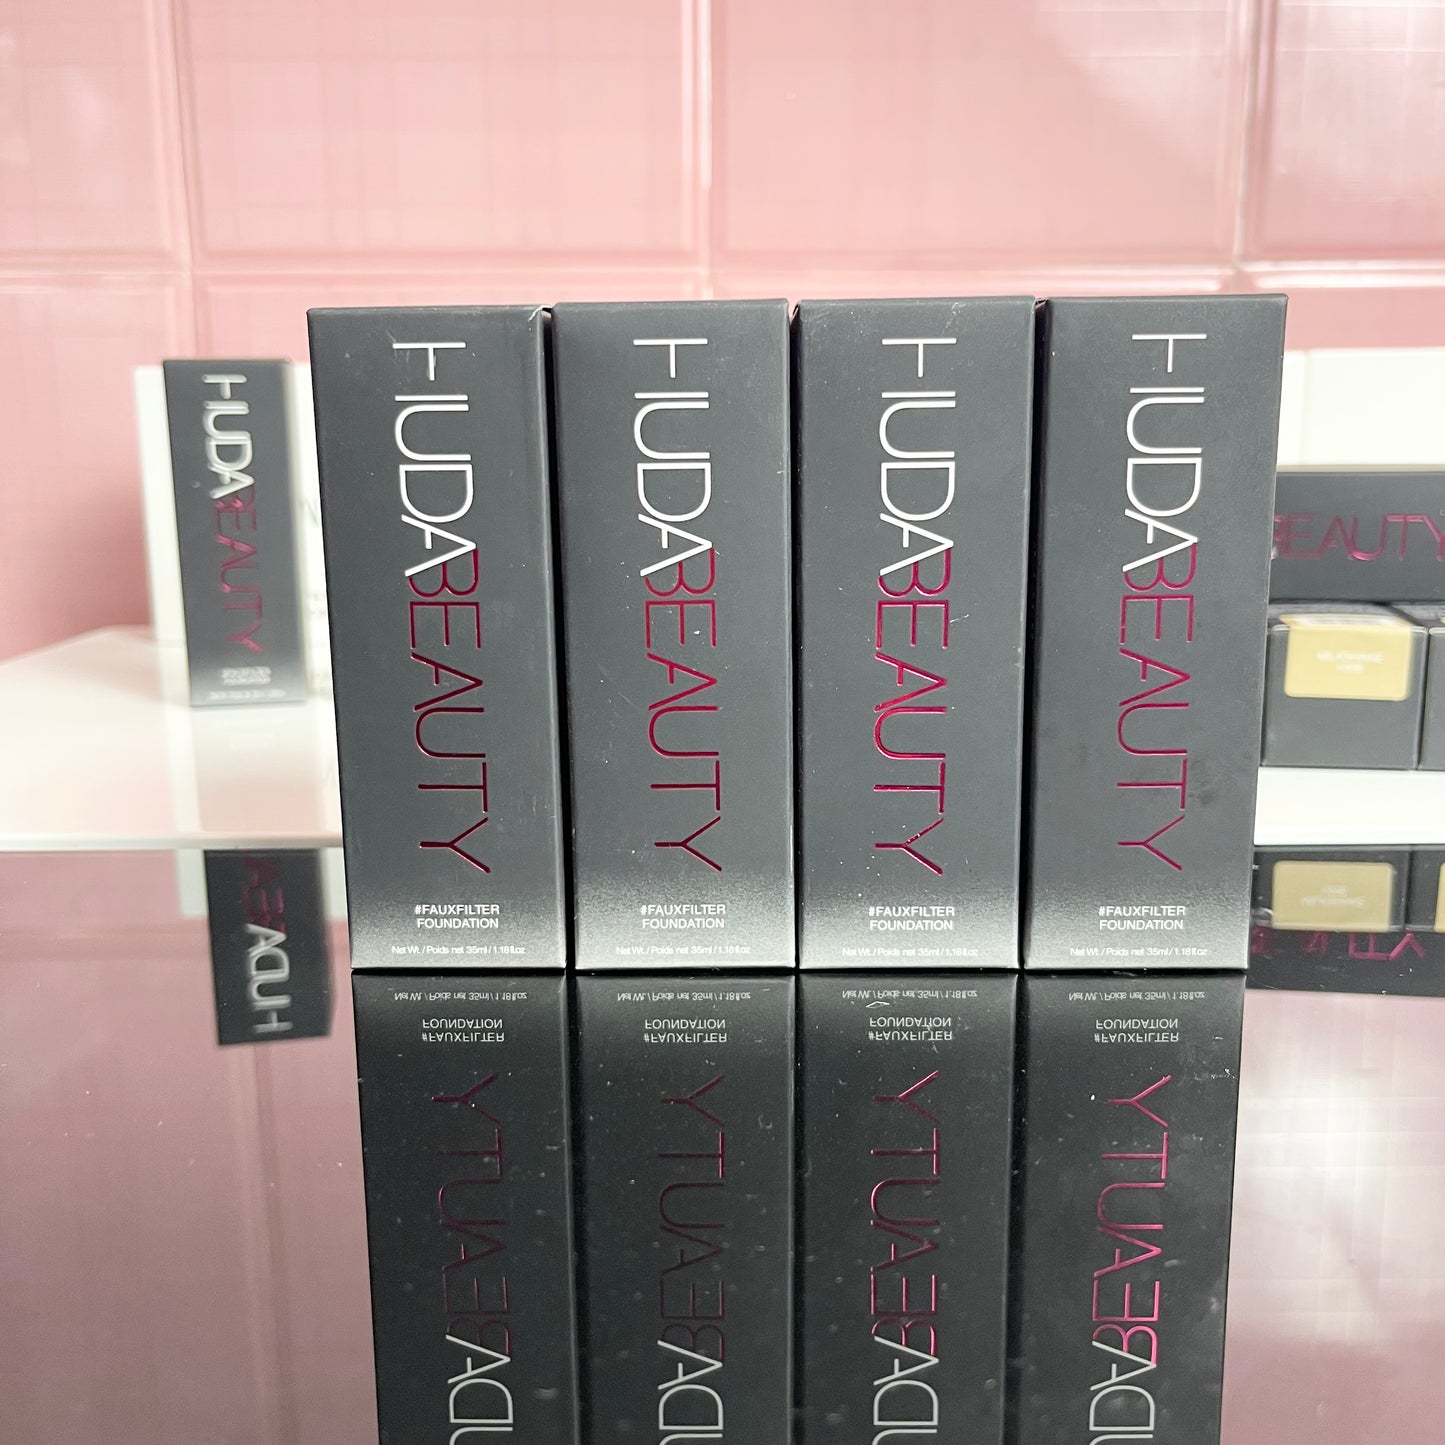 Huda Beauty Faux Filter Foundation. (Special discount)